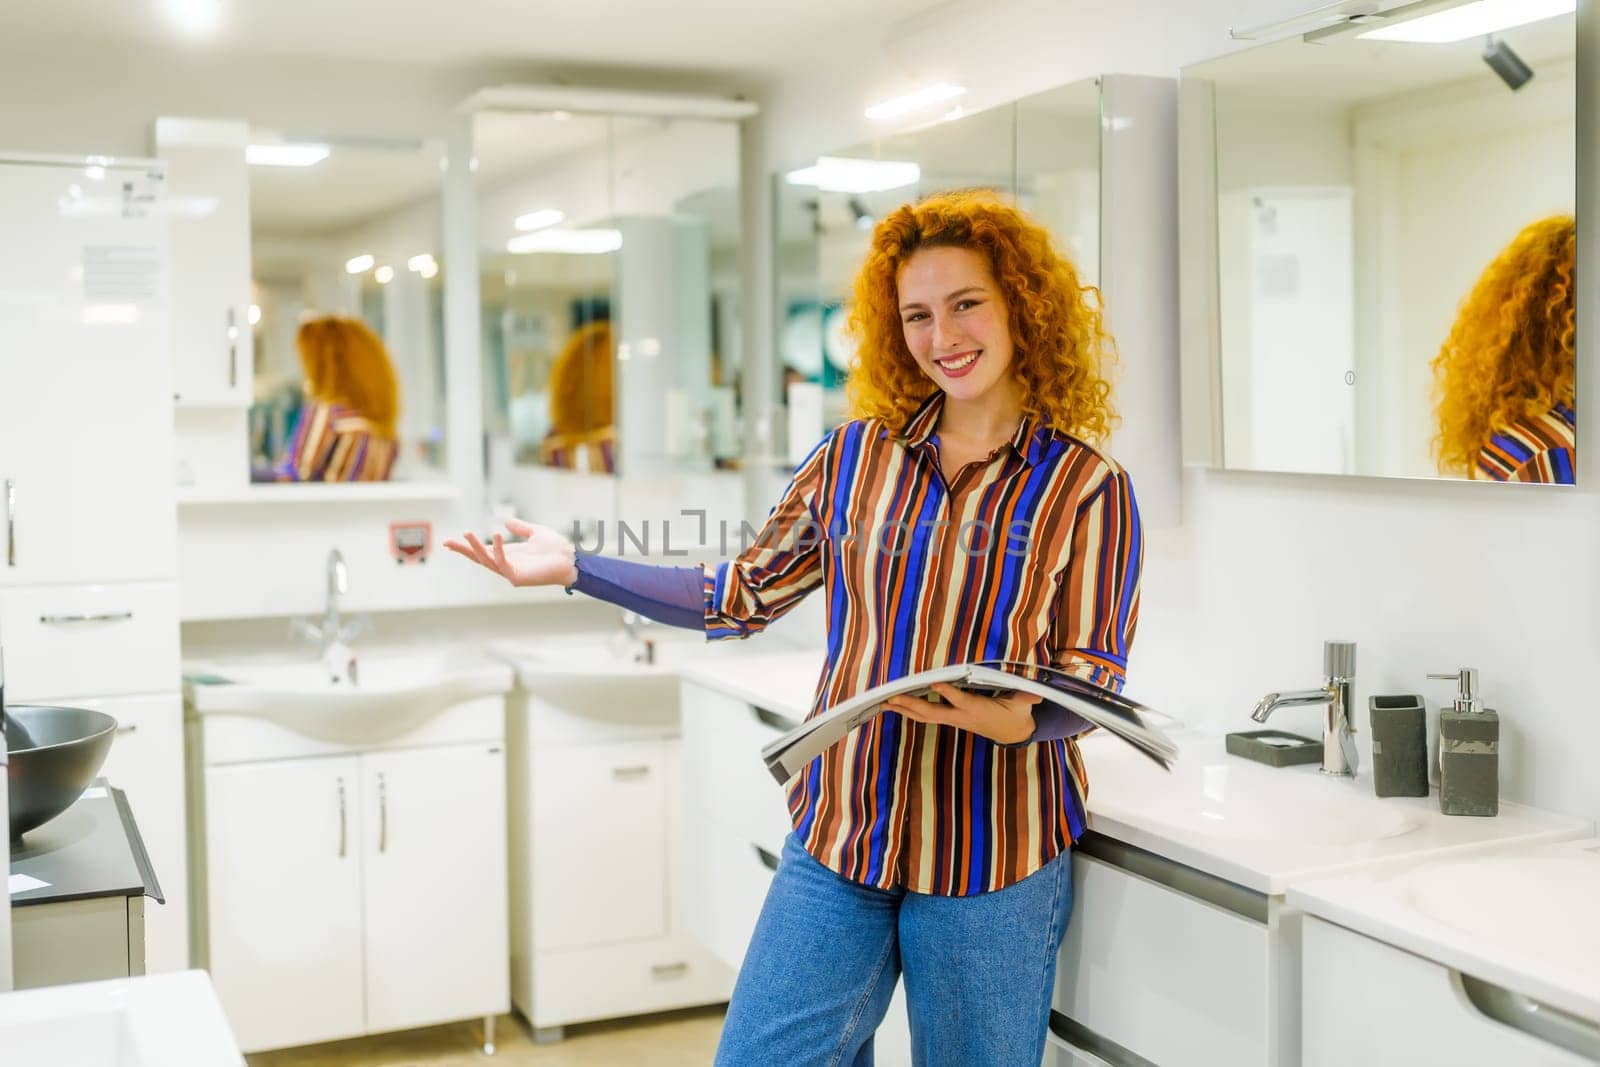 Portrait of salesperson in bathroom store. Happy redhead woman works in bath store. Sales occupation.